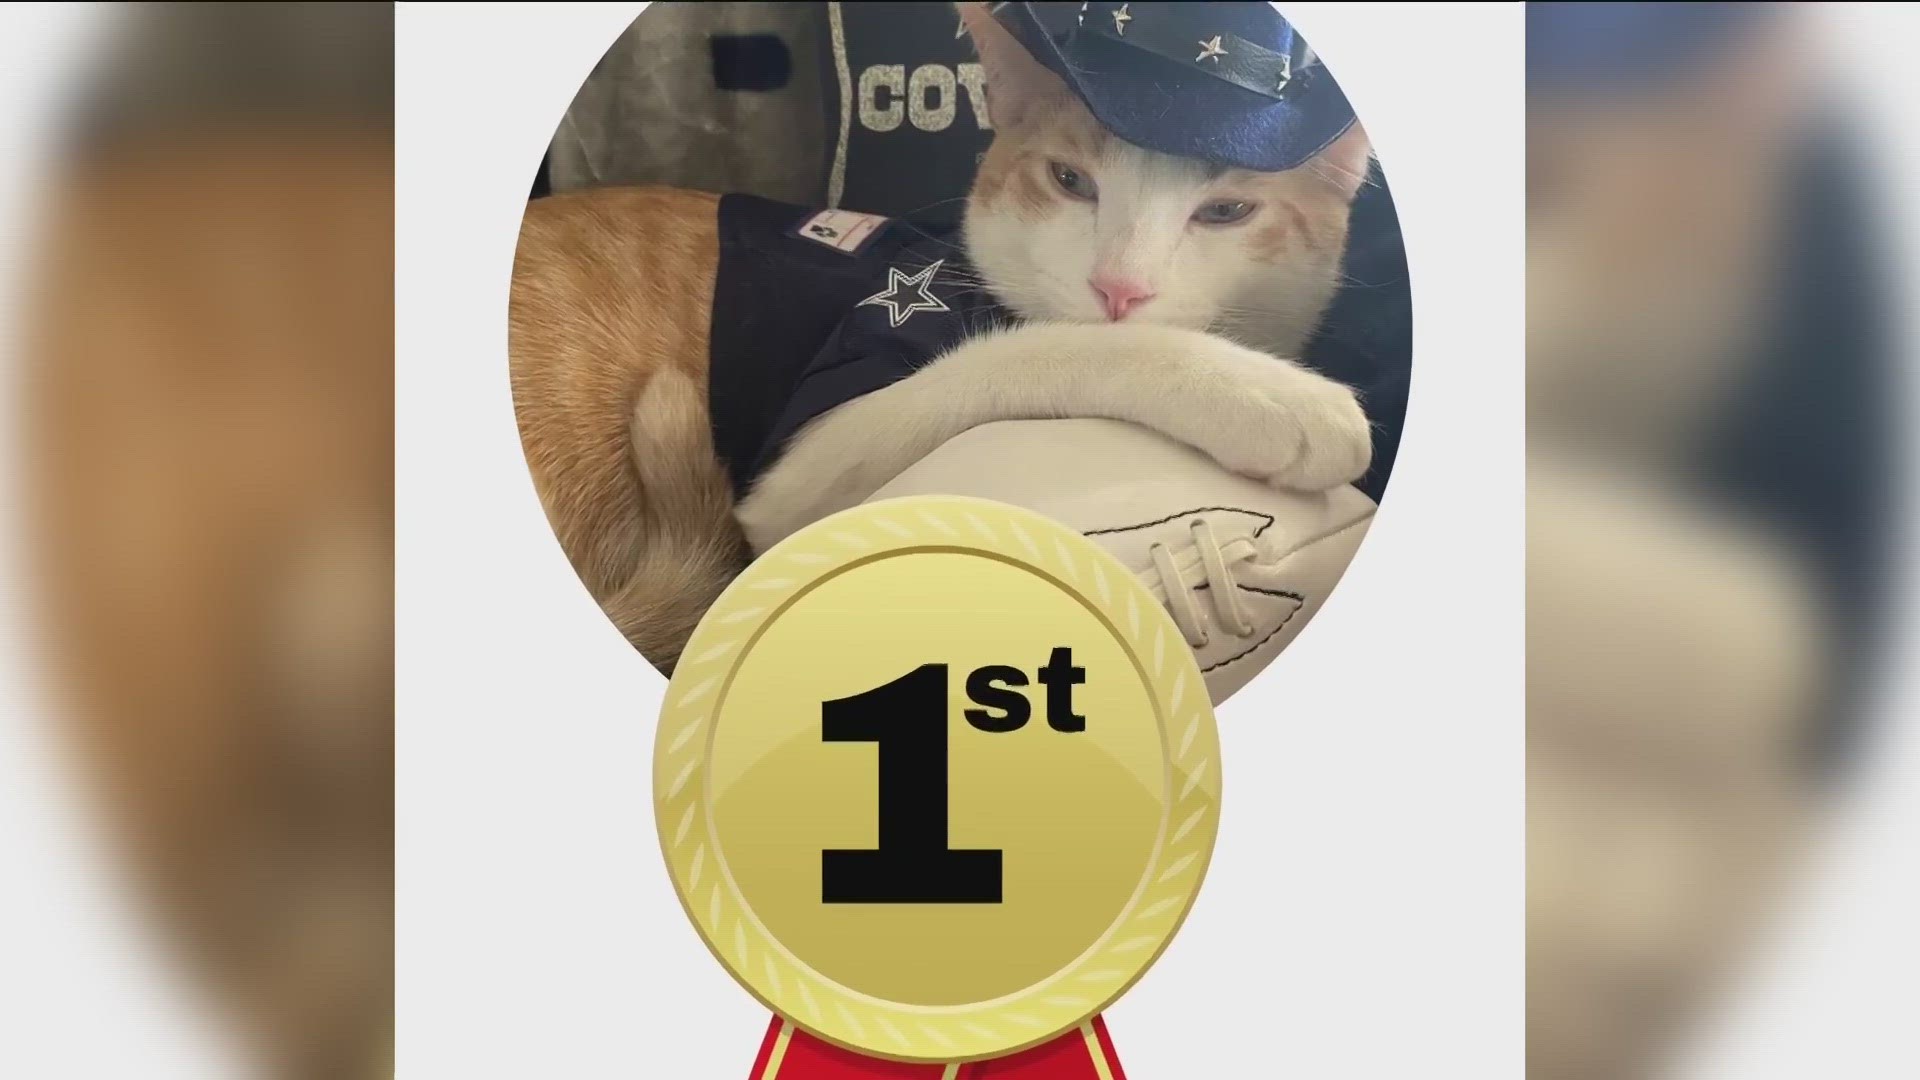 March Madness has come to and end and so has March Meowness. The competition was ferocious in both brackets and now we have a winner.